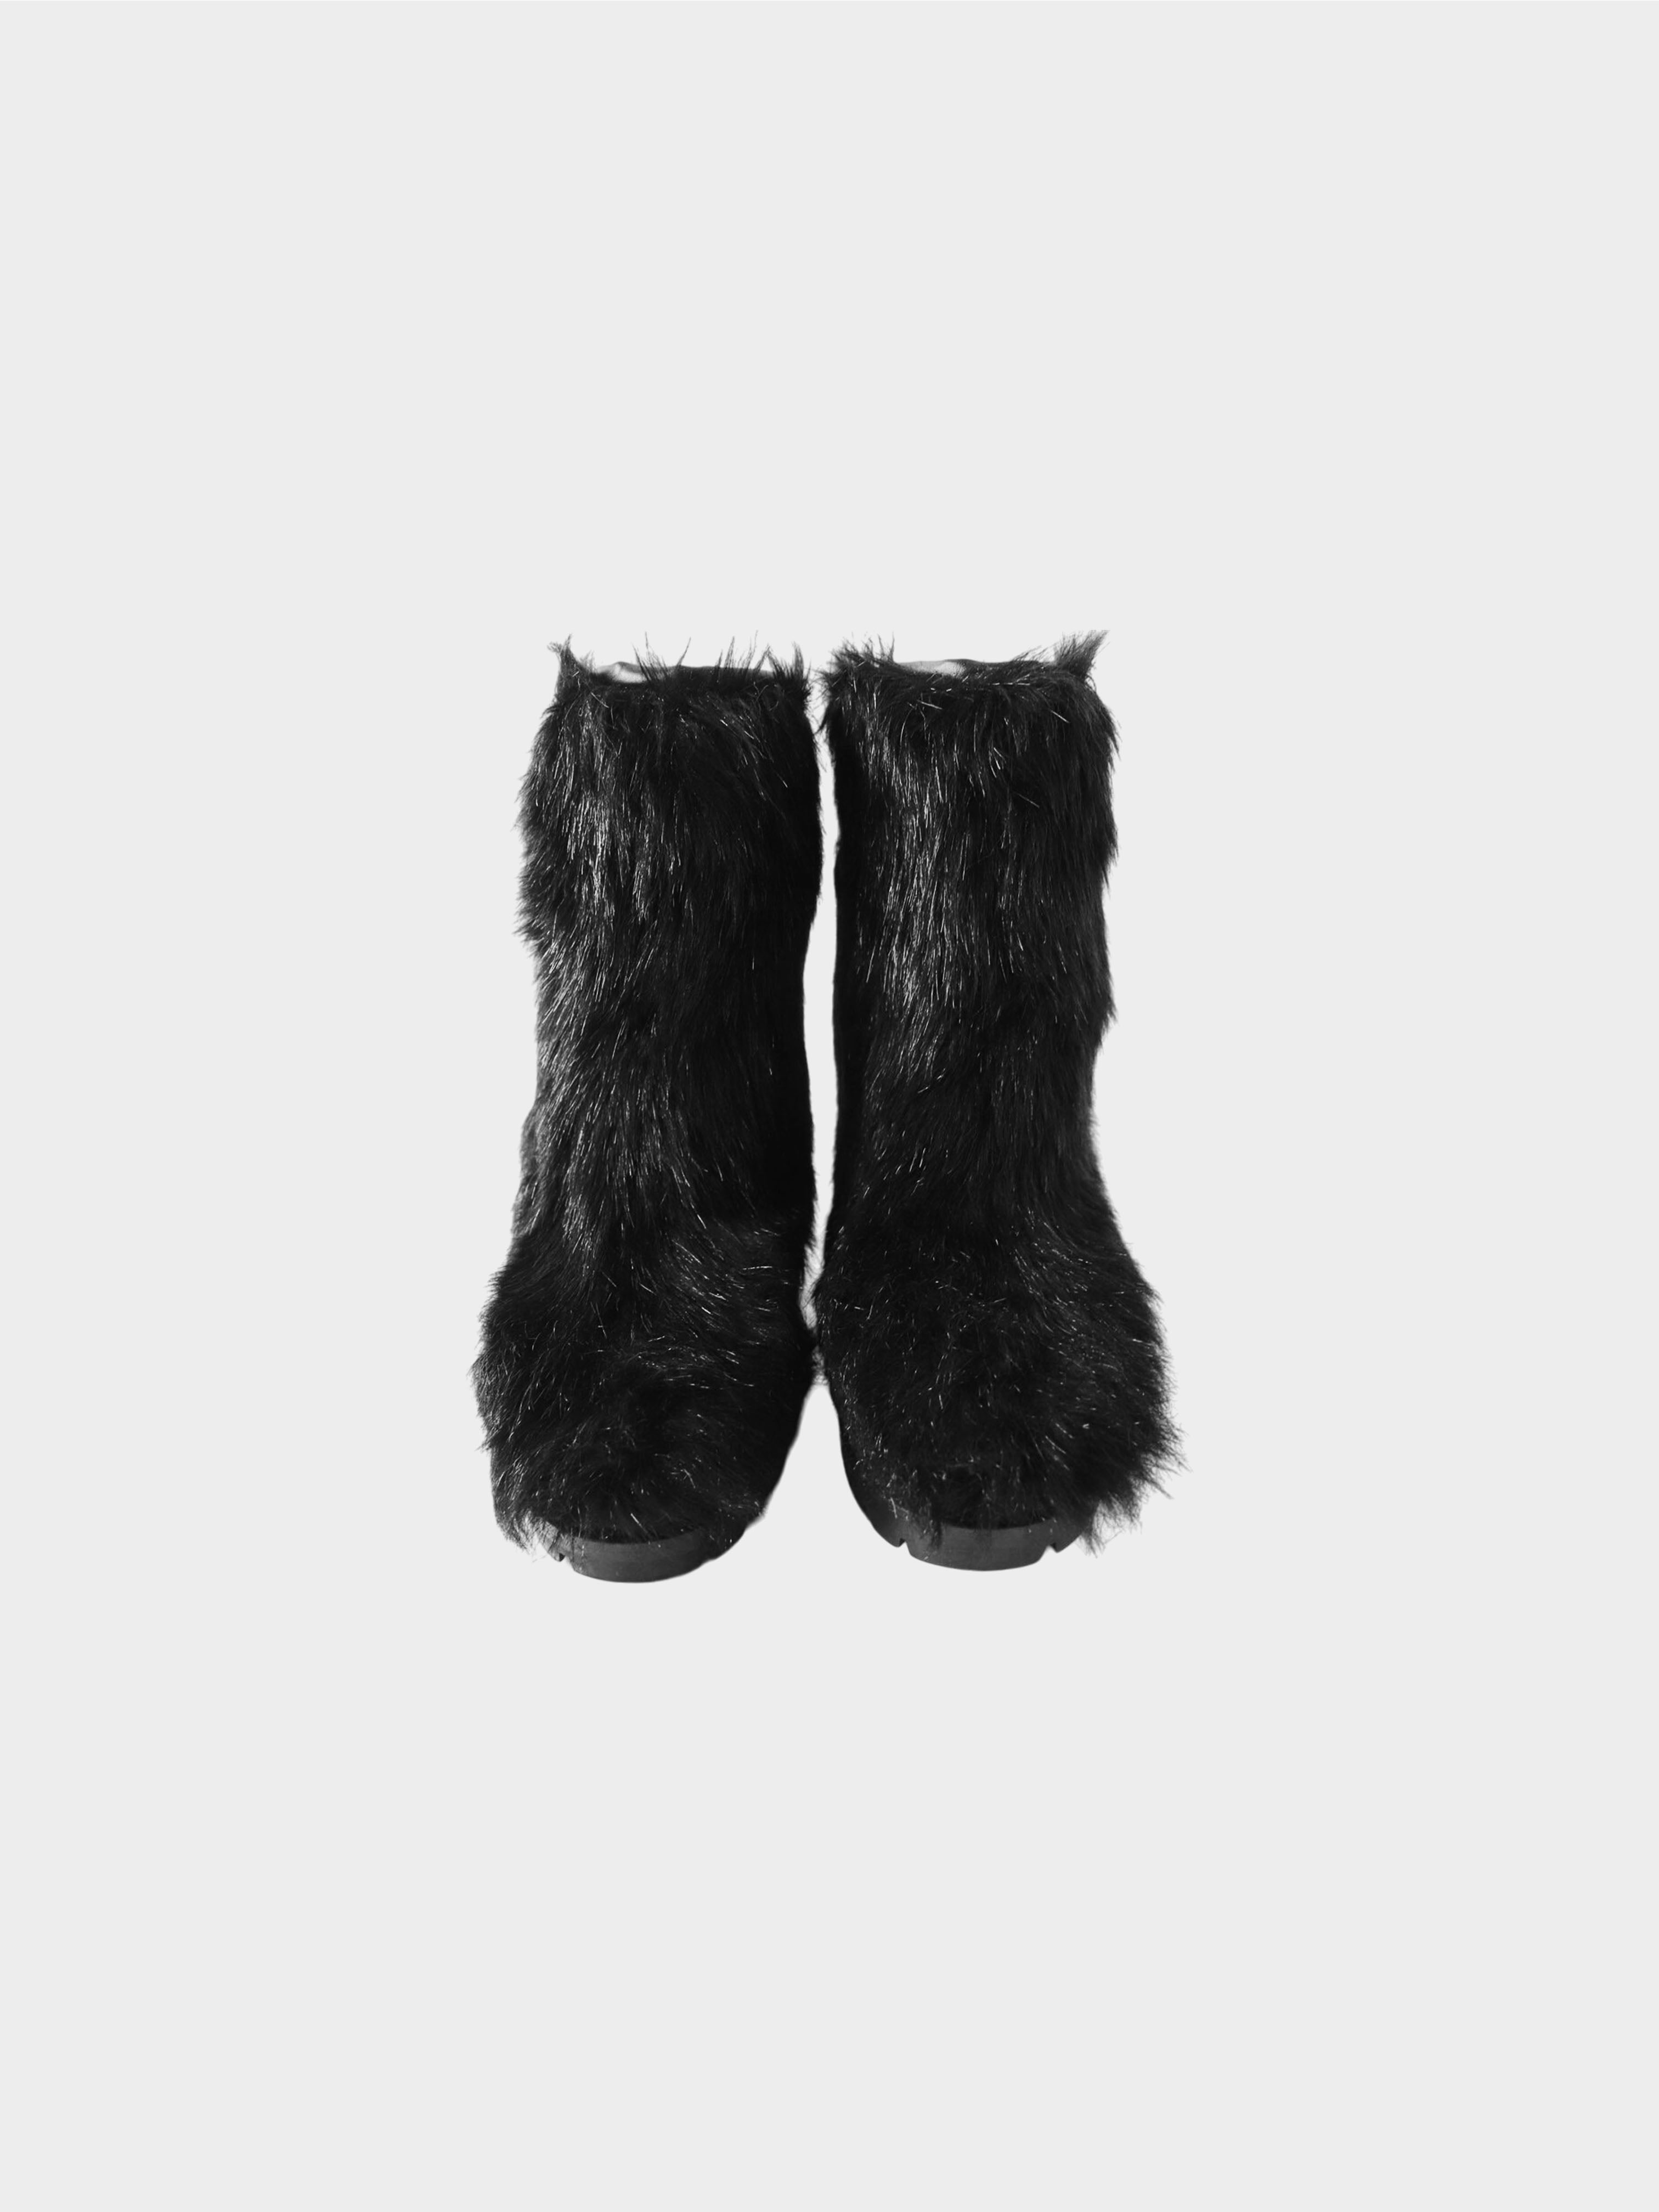 Chanel FW 2010 Rare Black Fur CC Boots with Belts